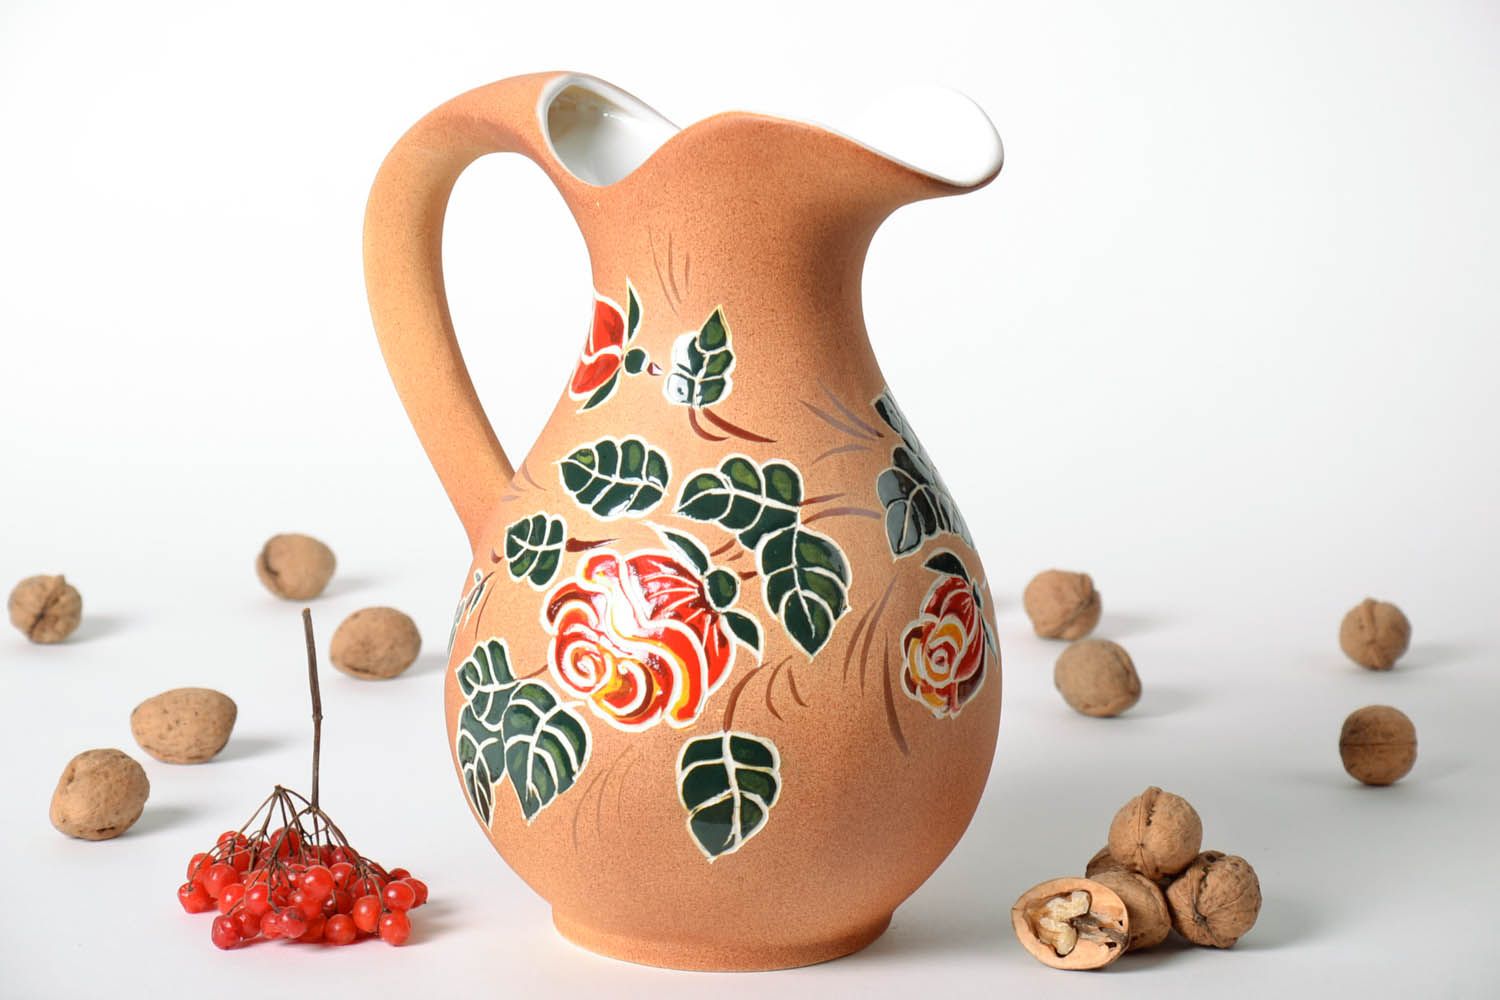 100 oz ceramic water jug with handle and floral design in beige color 4 lb photo 1